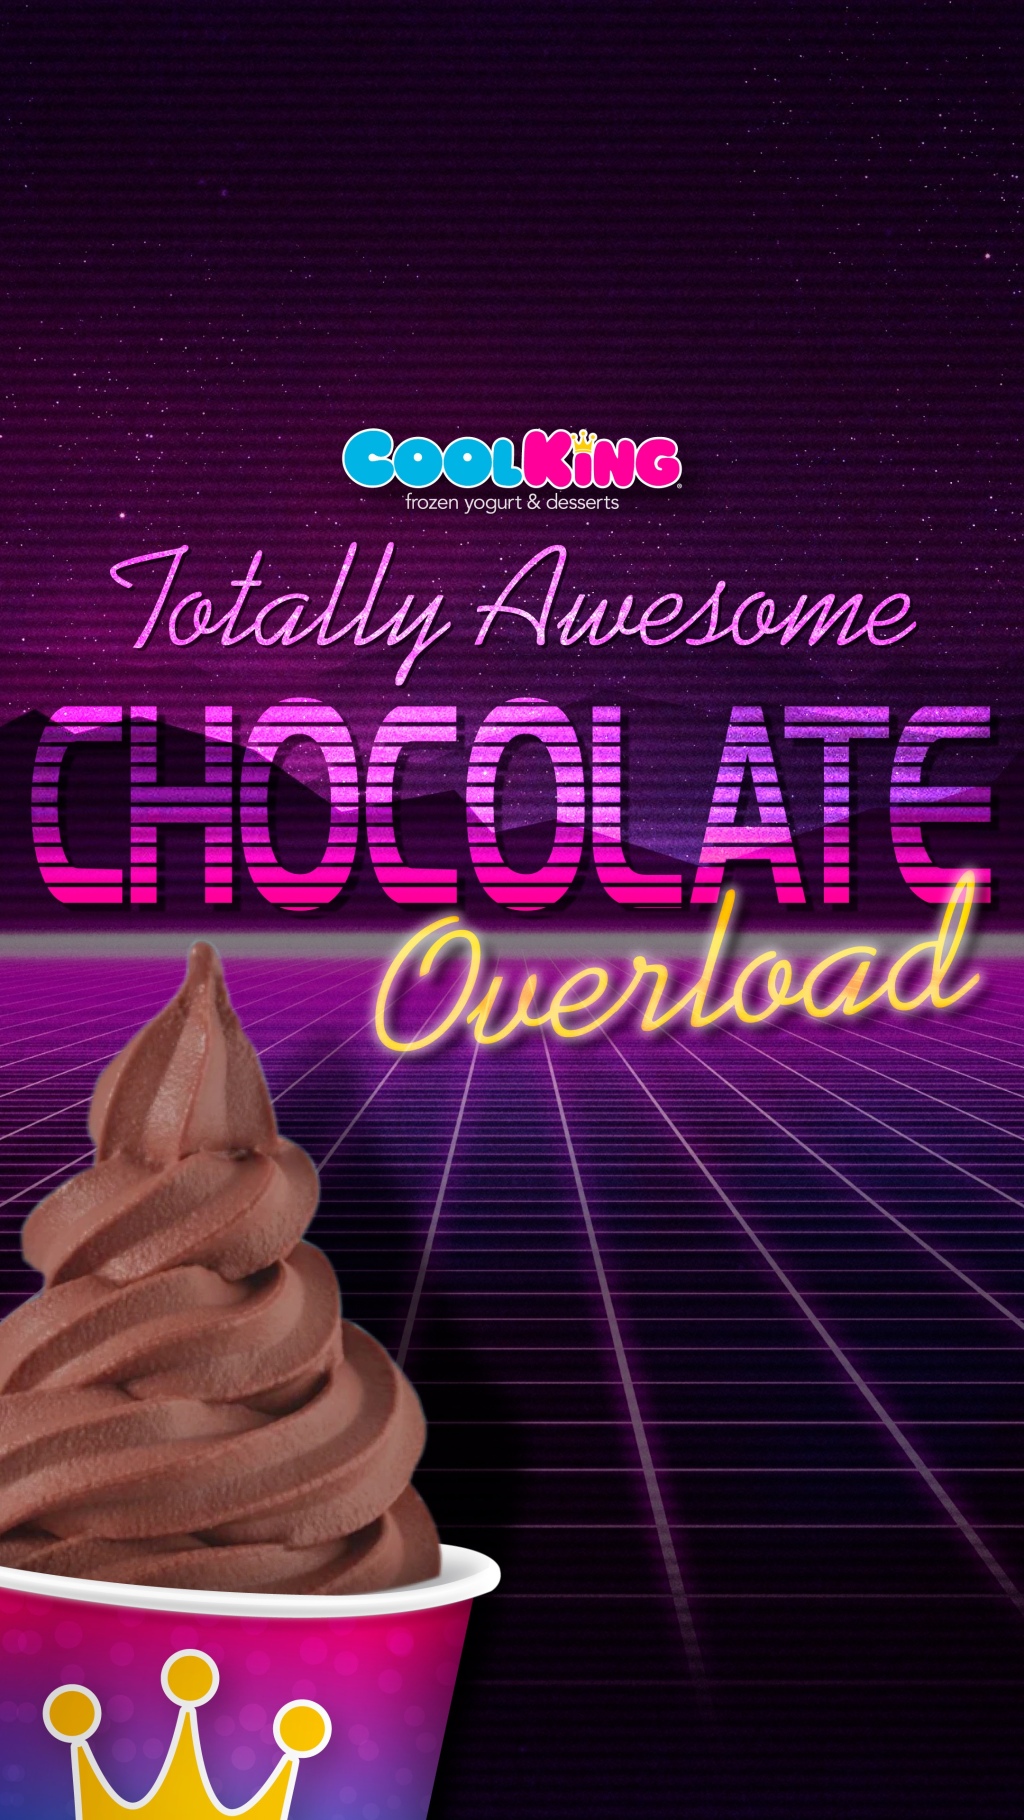 Cool King® “Totally Awesome Chocolate Overload” Ice Cream